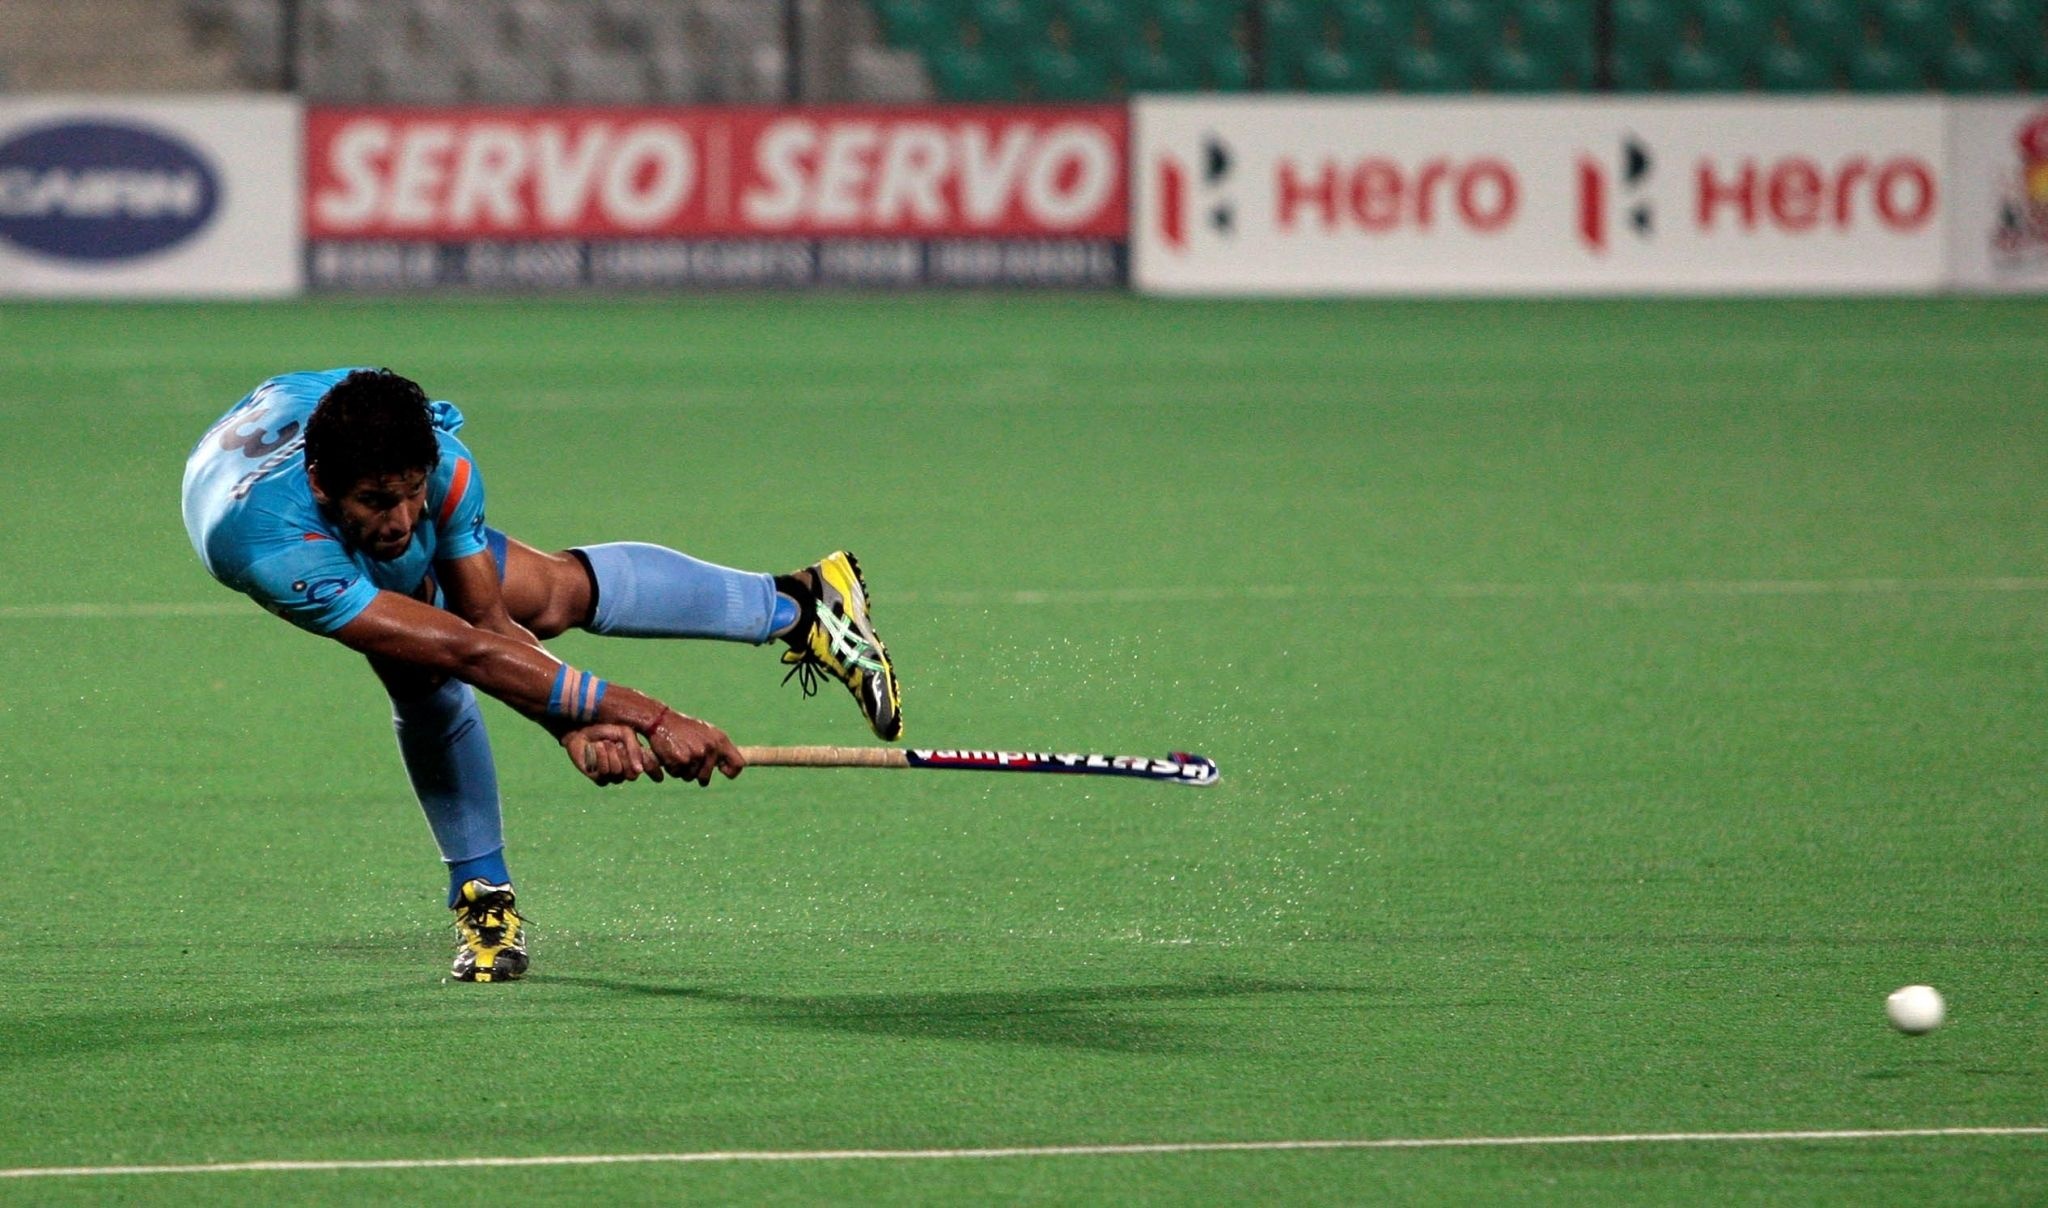 Field Hockey: Rupinder Pal Singh of the Indian team bends over while striking the ball with a stick. 2050x1210 HD Background.